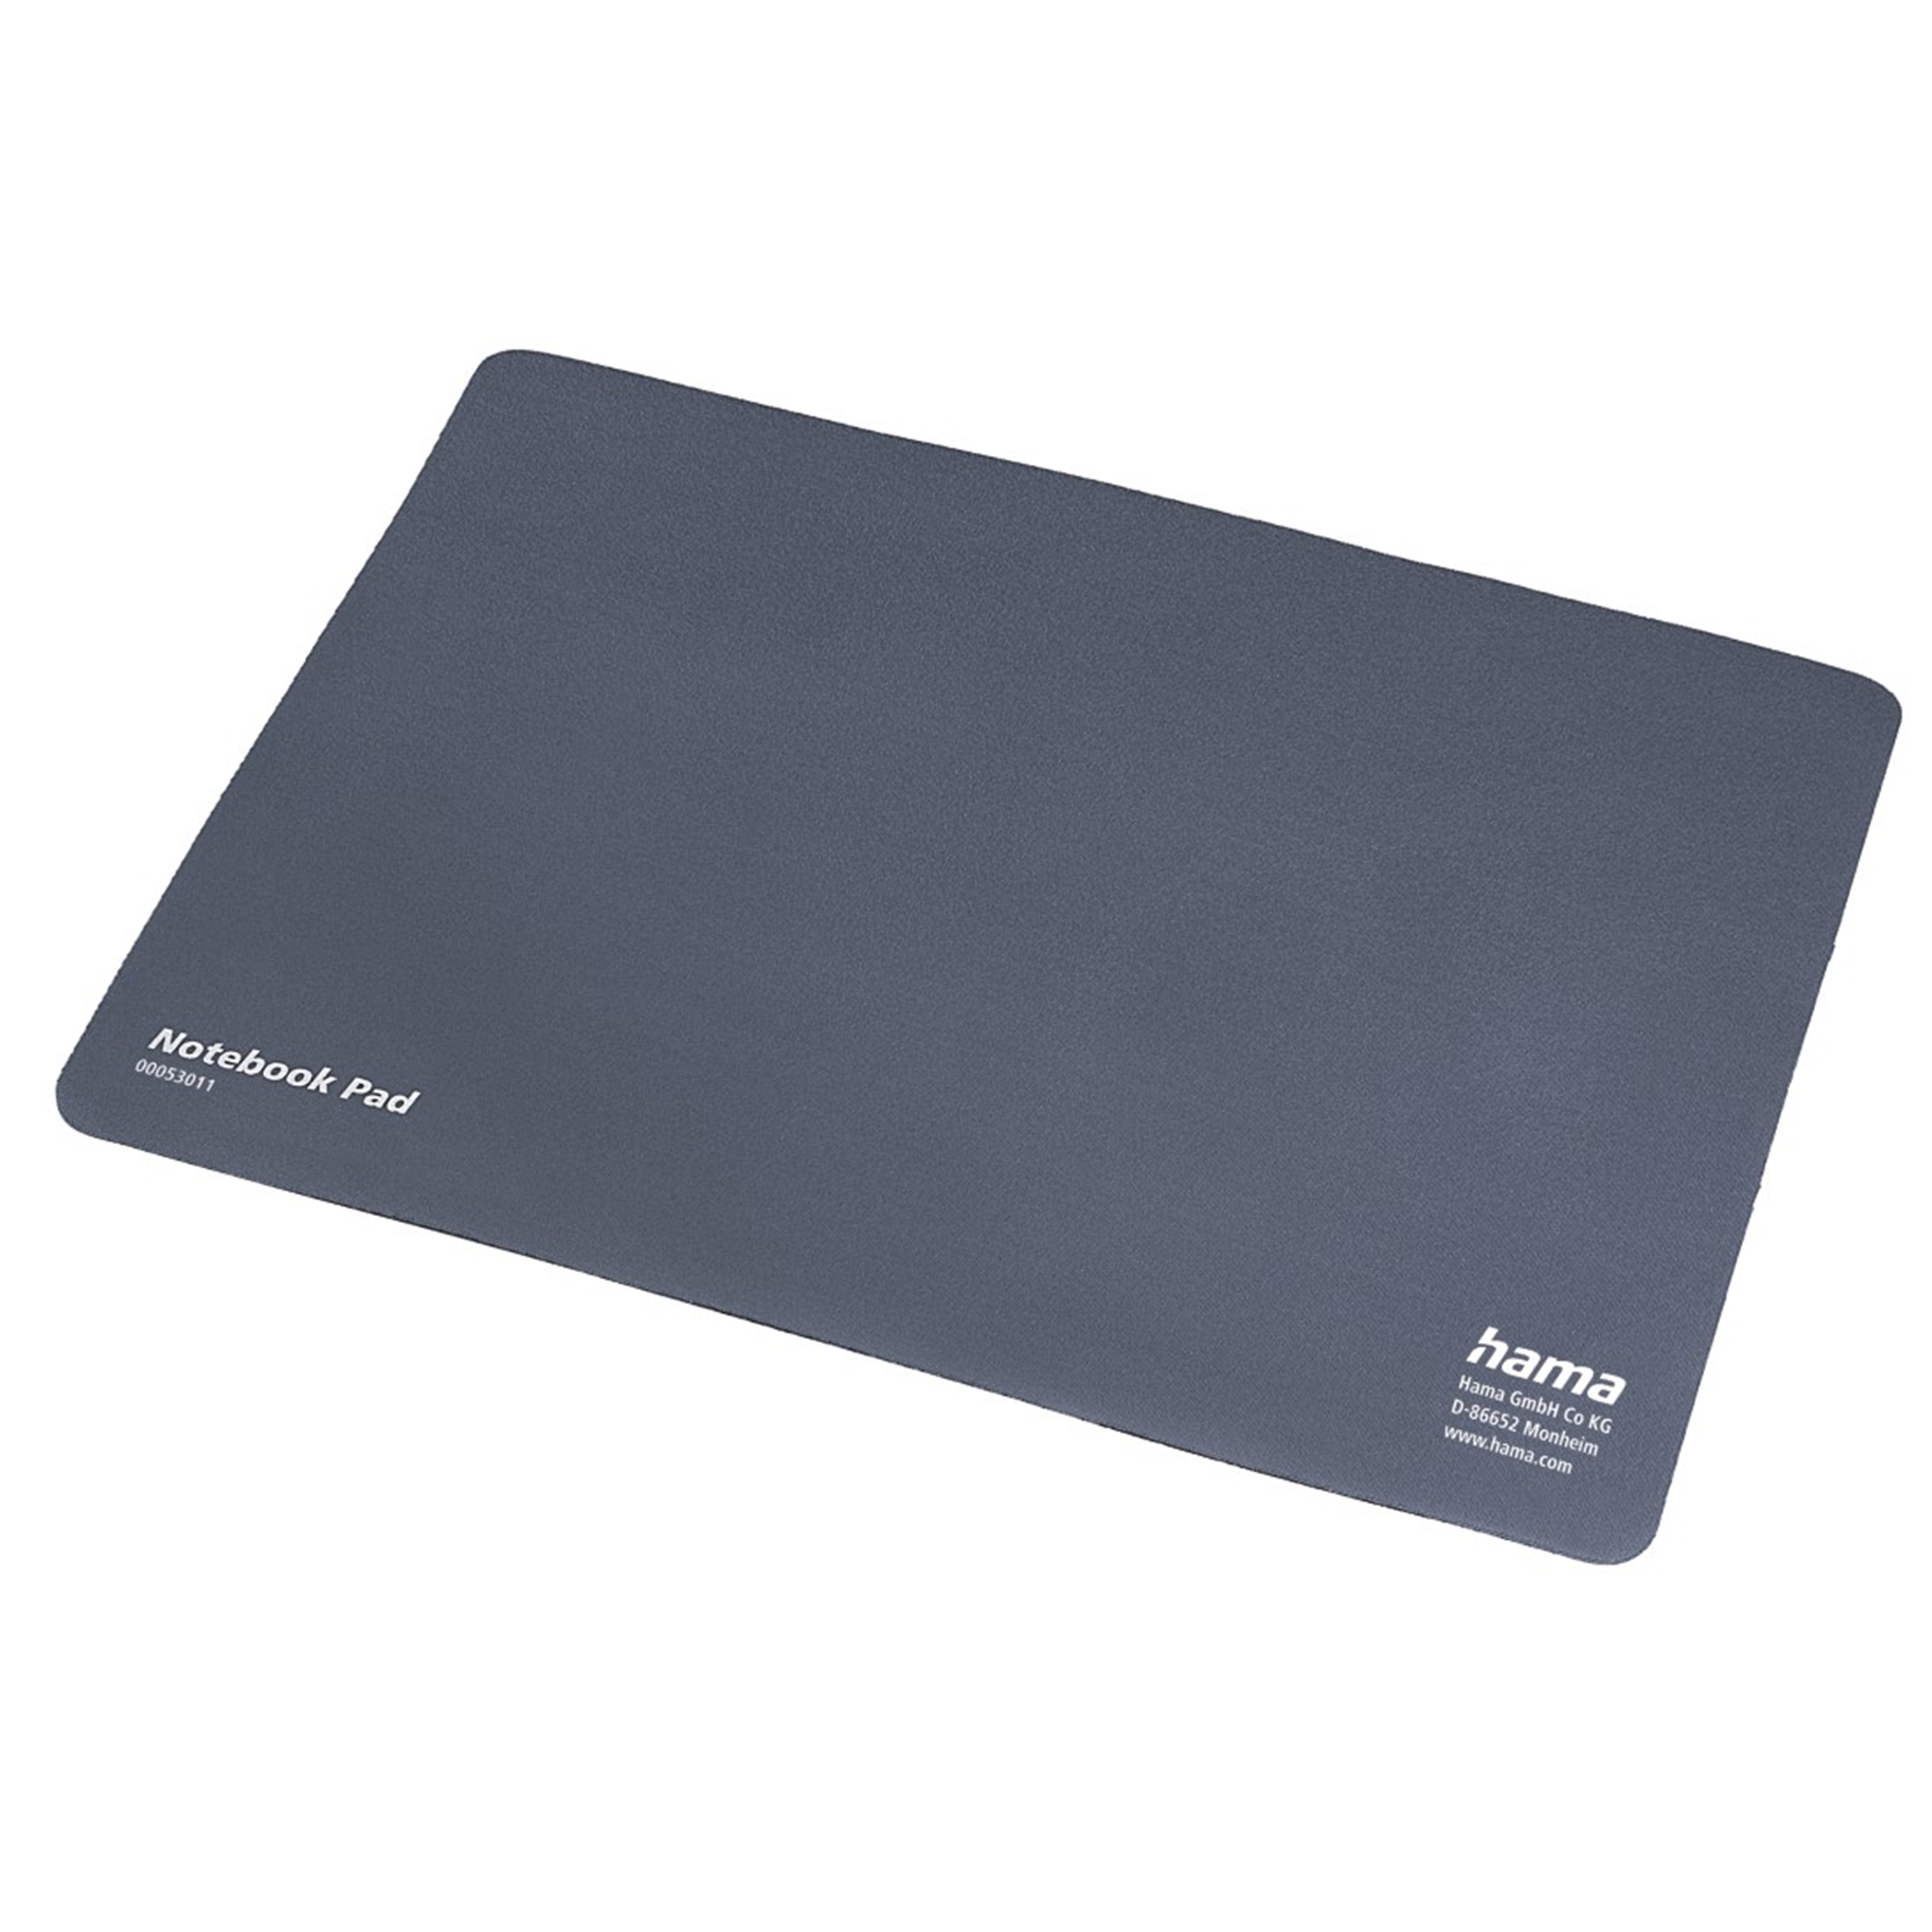 HAMA 3In1 Notebook-Pad